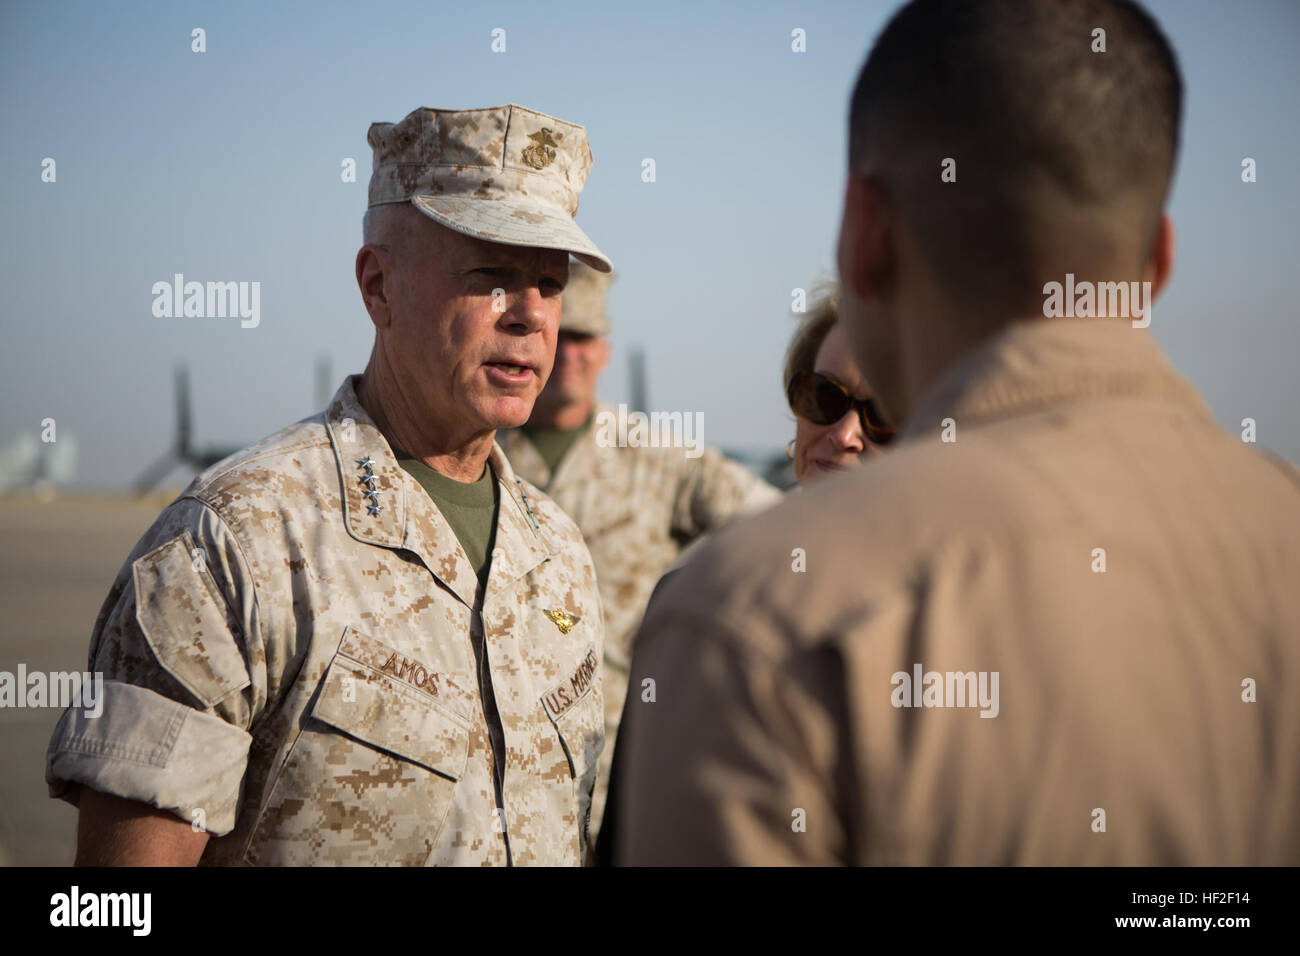 U.S. Marine Corps Gen. James F. Amos, 35th commandant of the Marine Corps, speaks with Lt. Col. Colin J. Brainard, commanding officer of Medium Tiltrotor Squadron 264 (VMM-264), the aviation combat element of Special-Purpose Marine Air Ground Task Force Crisis Response (SP-MAGTF Crisis Response), aboard Morón Air Base, Spain, Sept. 2, 2014. Amos spoke to the Marines and Sailors about the significance of SP-MAGTF Crisis Response. SP-MAGTF Crisis Response is a rotational force of Marines and Sailors that give U.S. Africa Command the ability to rapidly respond to a broad range of military operati Stock Photo